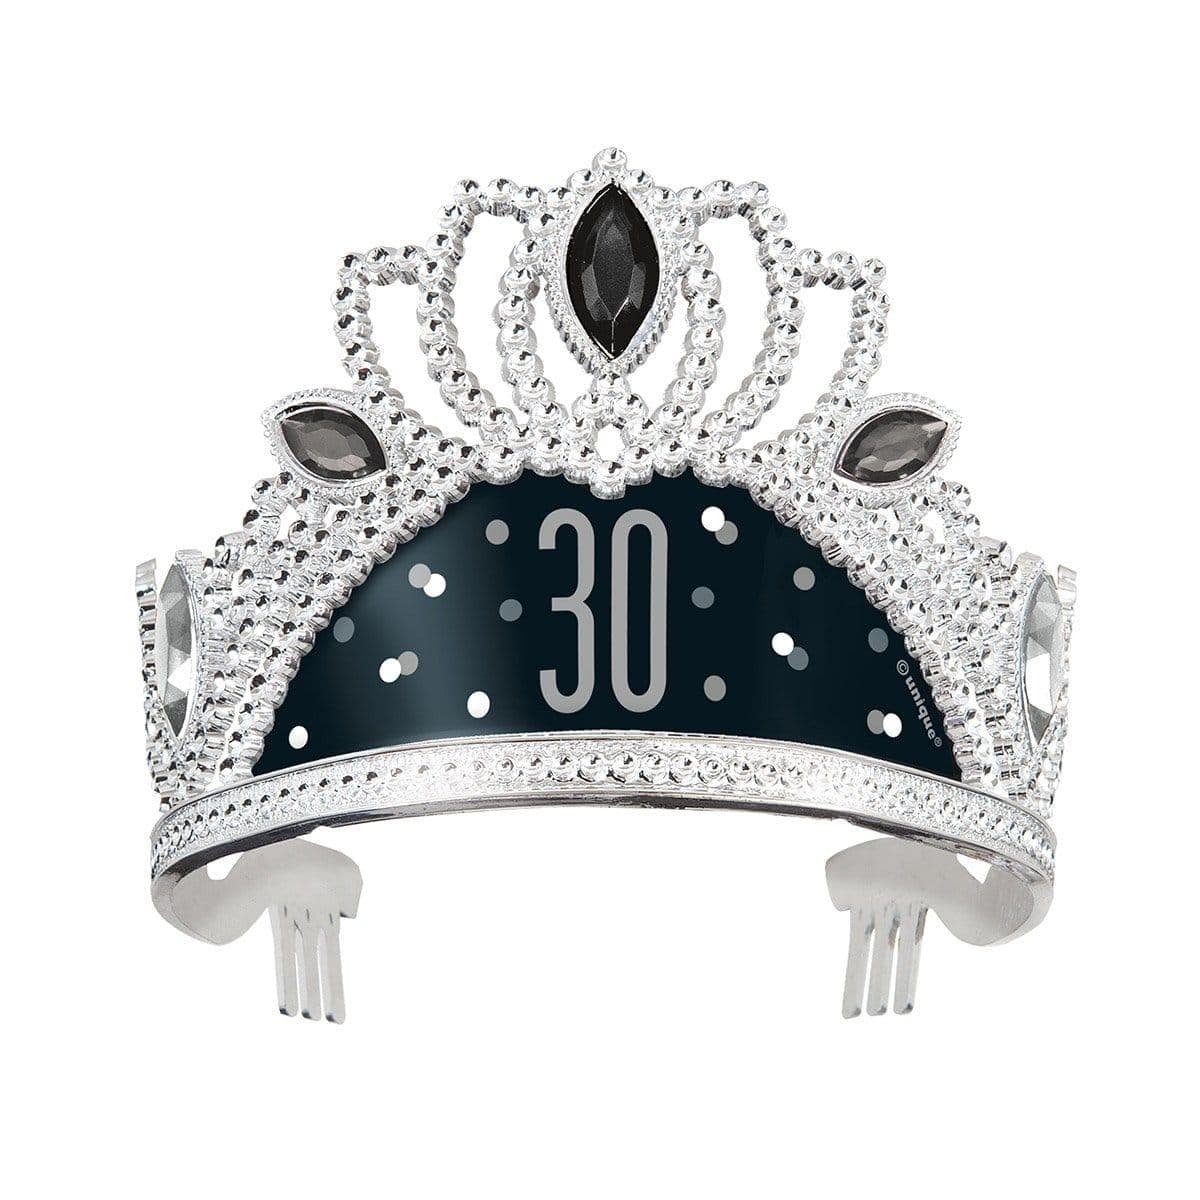 Buy Age Specific Birthday Bonne Fête Black/Silver - Tiara - 30 sold at Party Expert